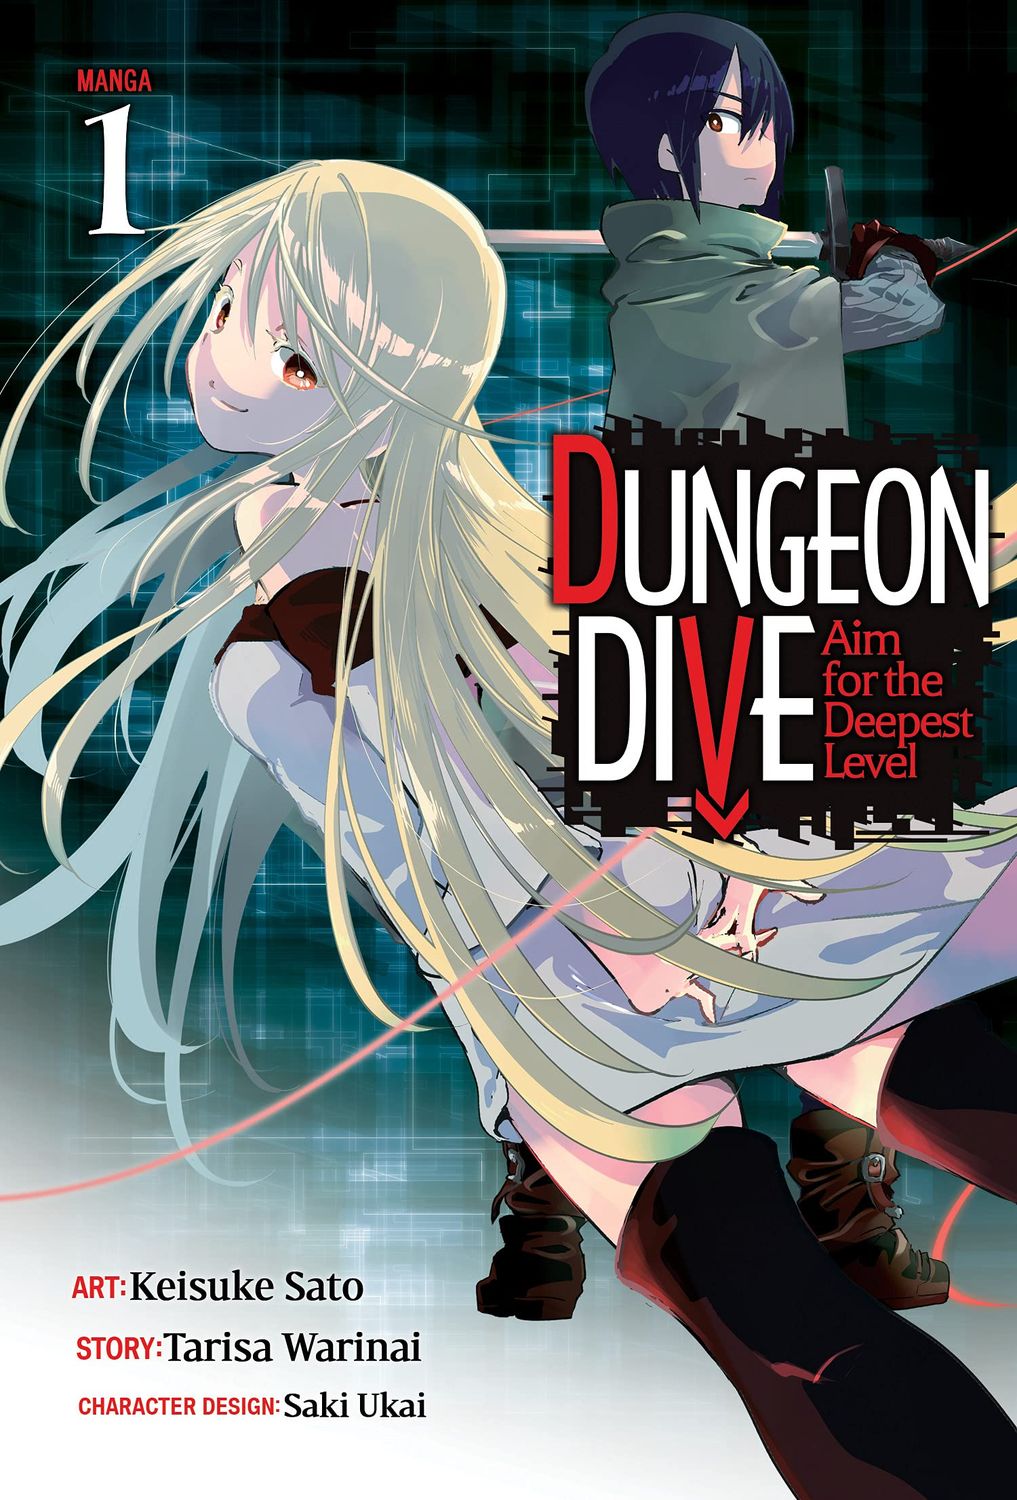 Dungeon Dive: Aim for the Deepest Level - Volume 1 | Tarisa Warinai